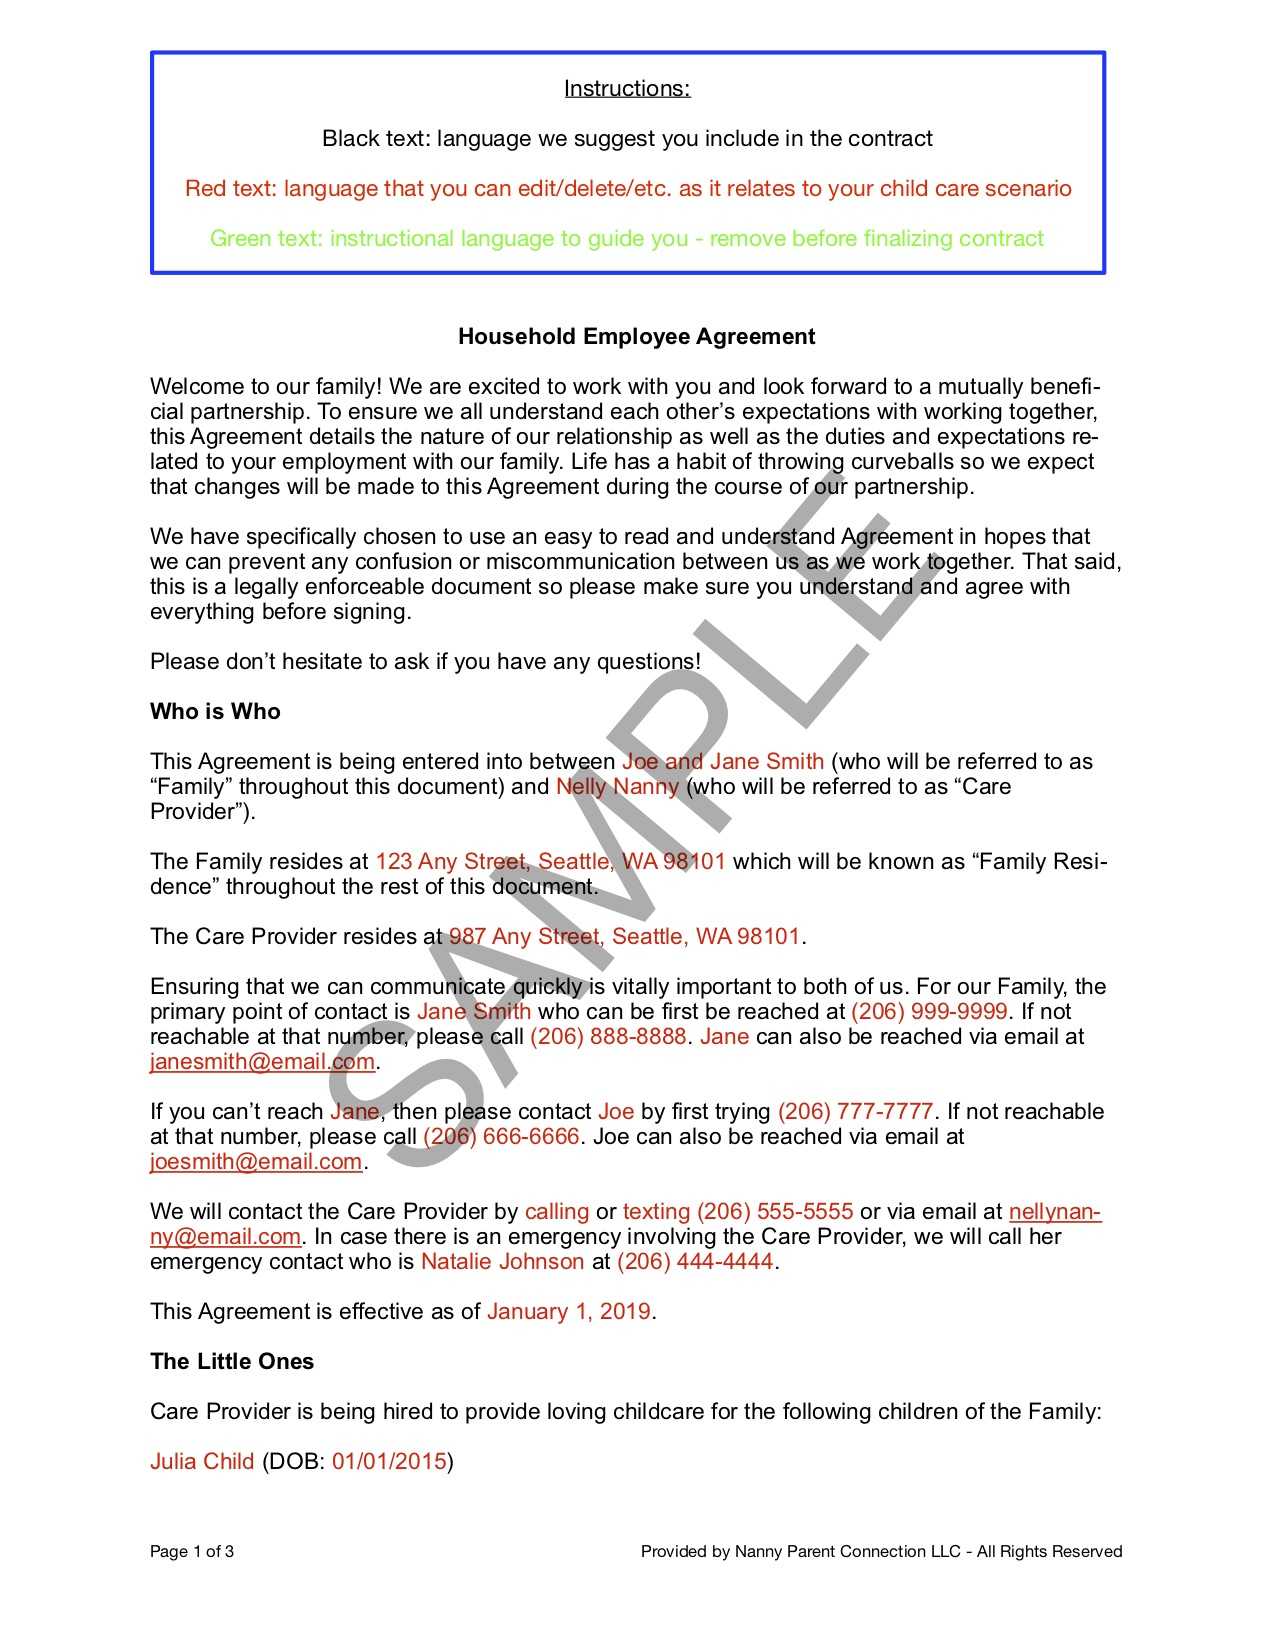 Household Employee Agreement | Nanny Parent Connection Pertaining To Nanny Contract Template Word